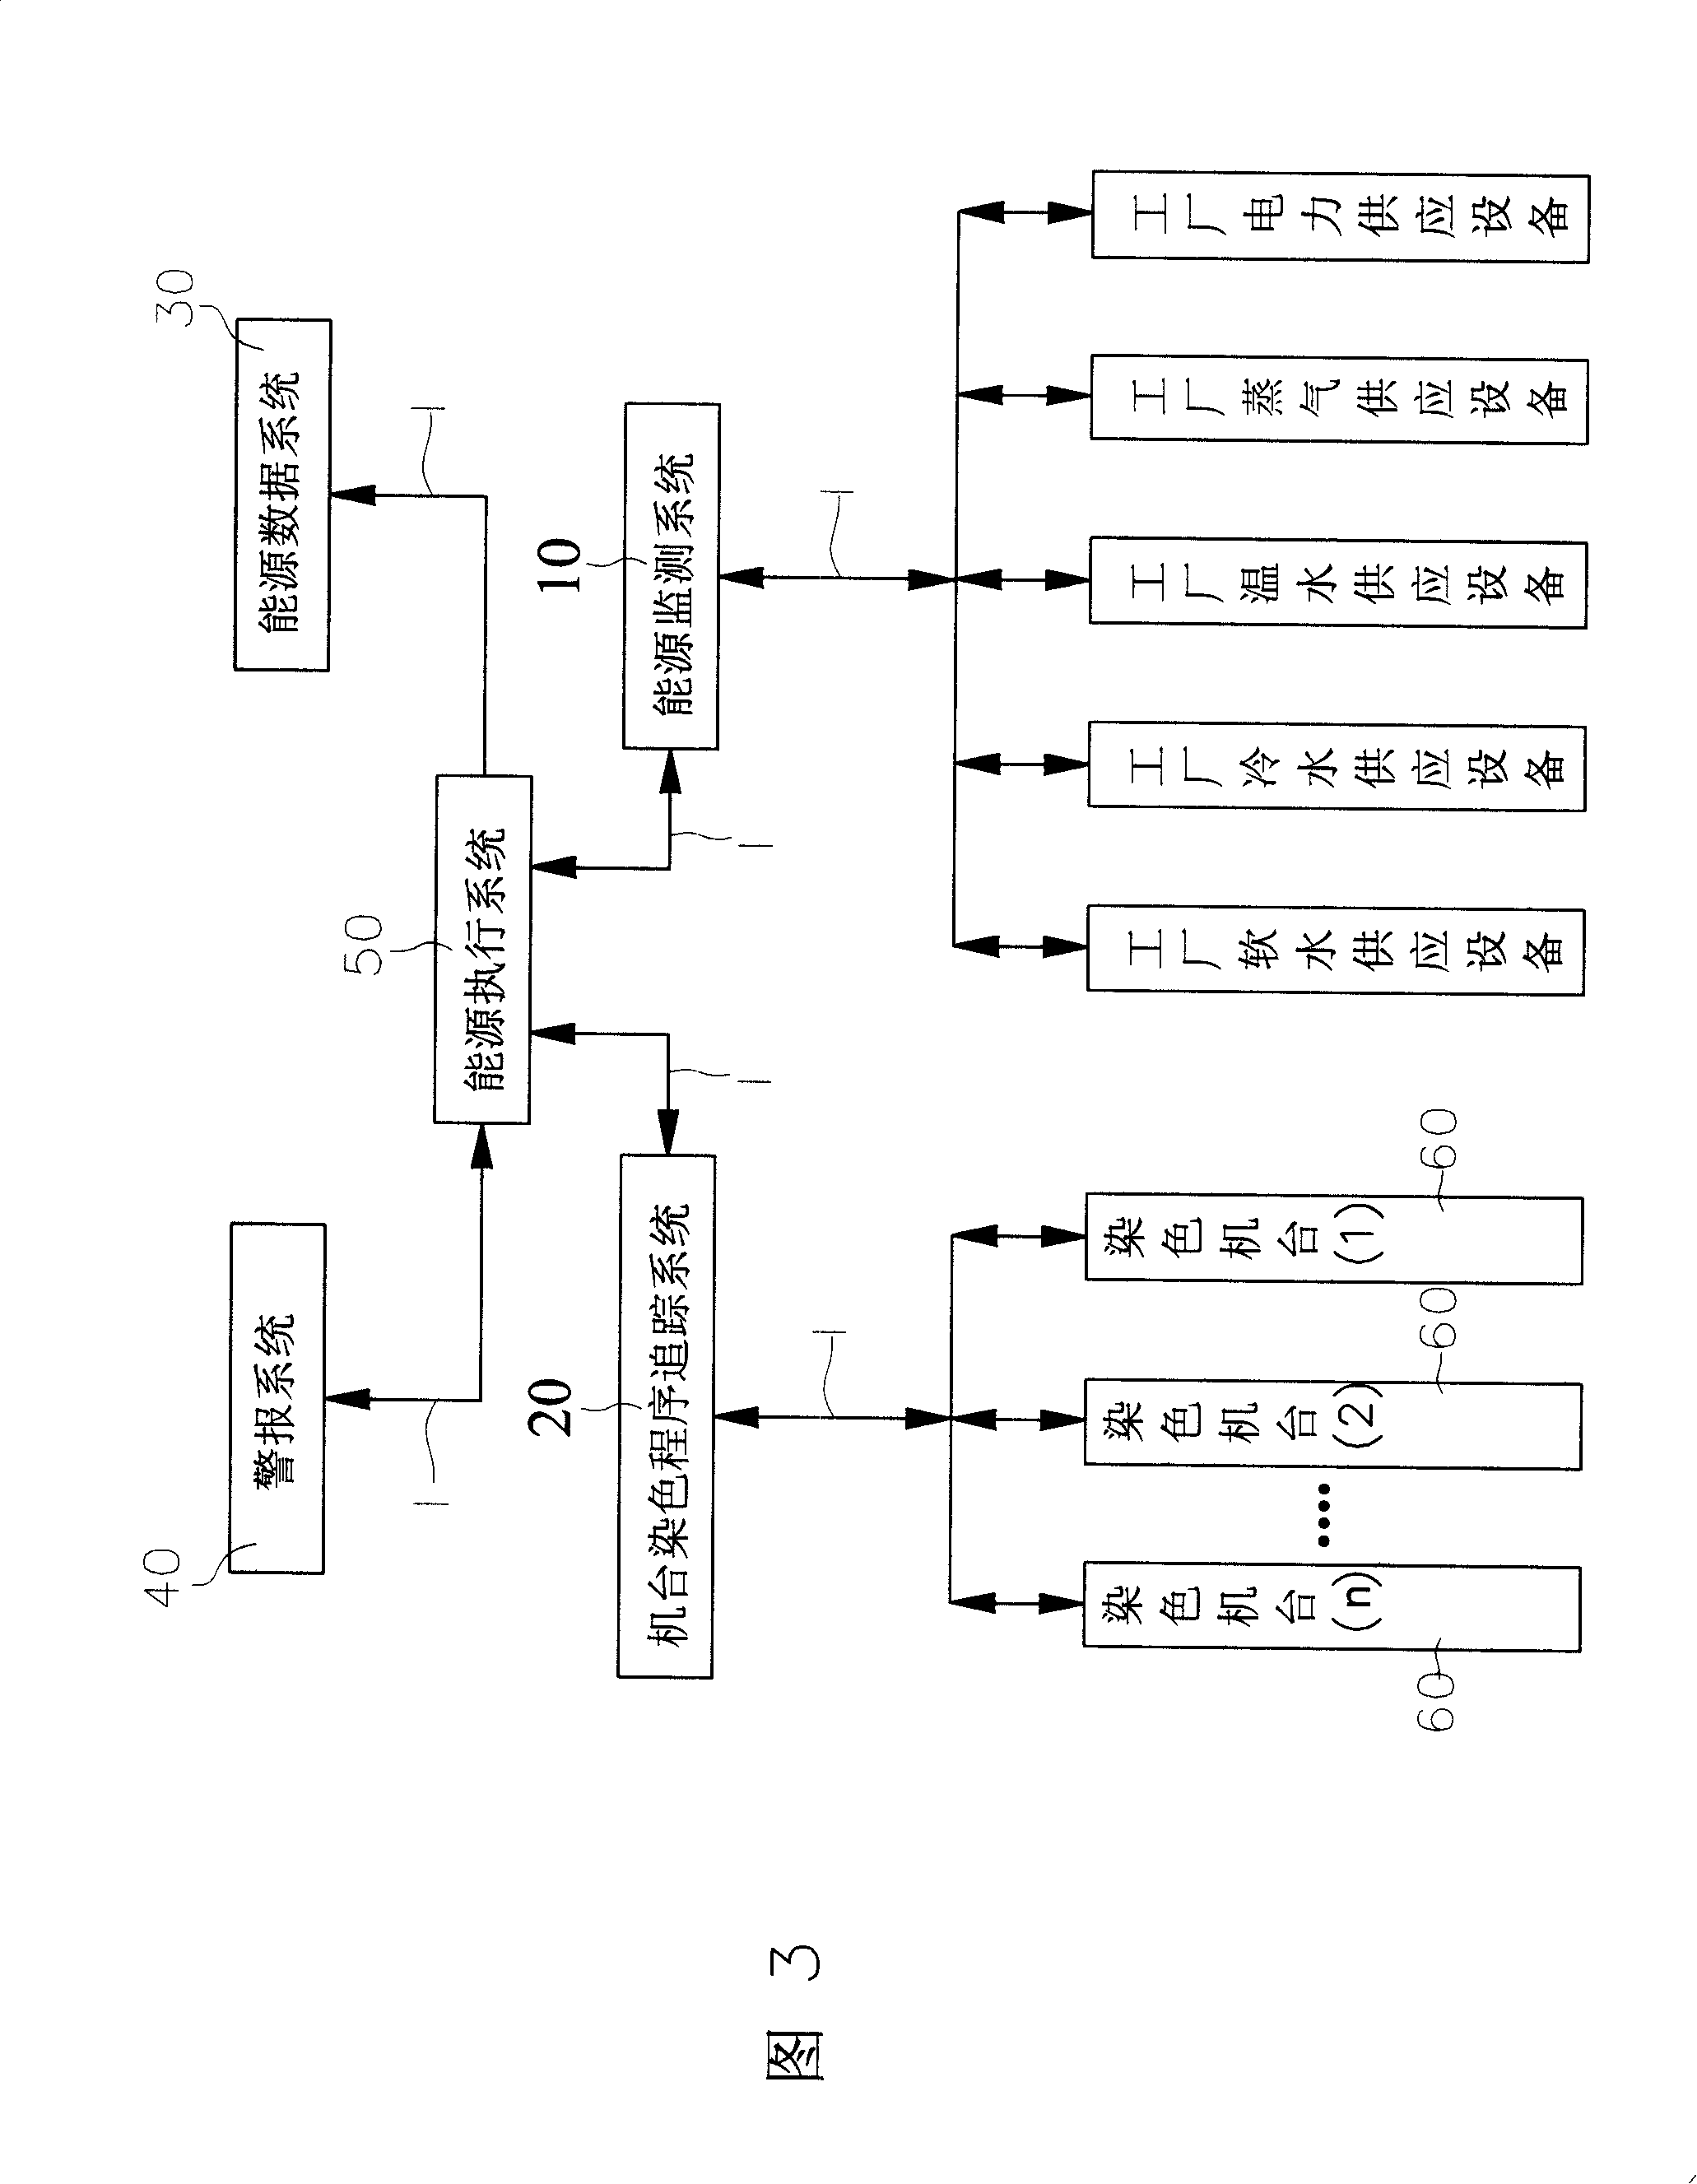 Method for reducing integer energy consumption of colour dyeing machine in dyeing and finishing manufactory